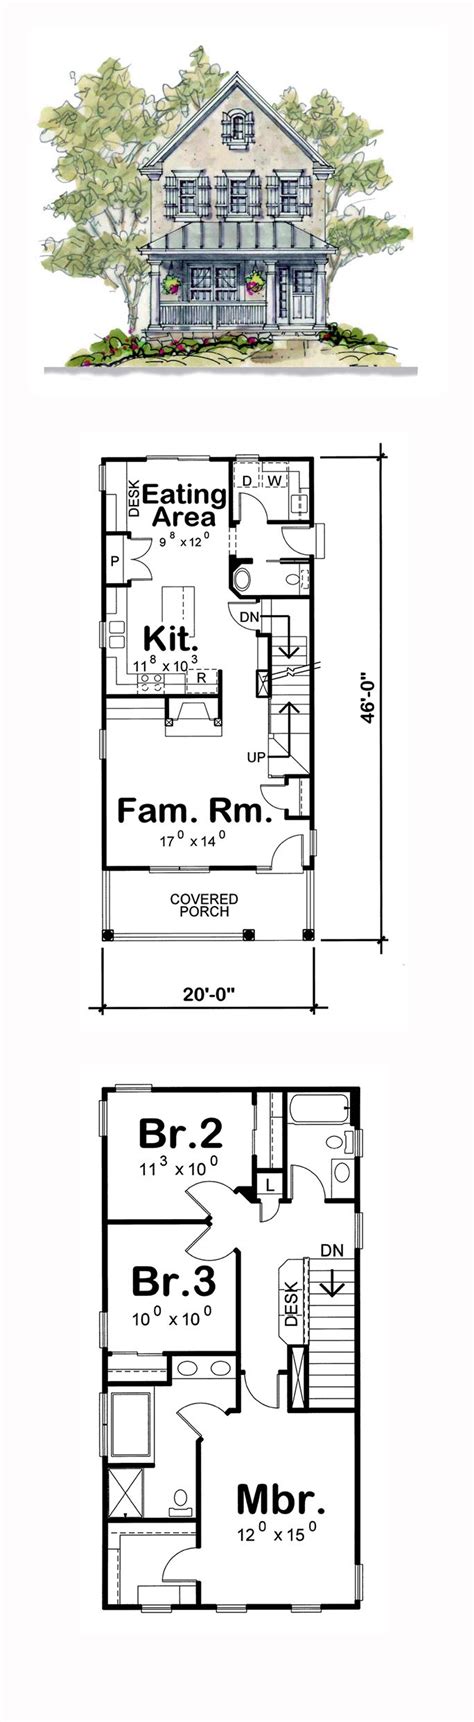 Small House Plans For Narrow Lots House Plans